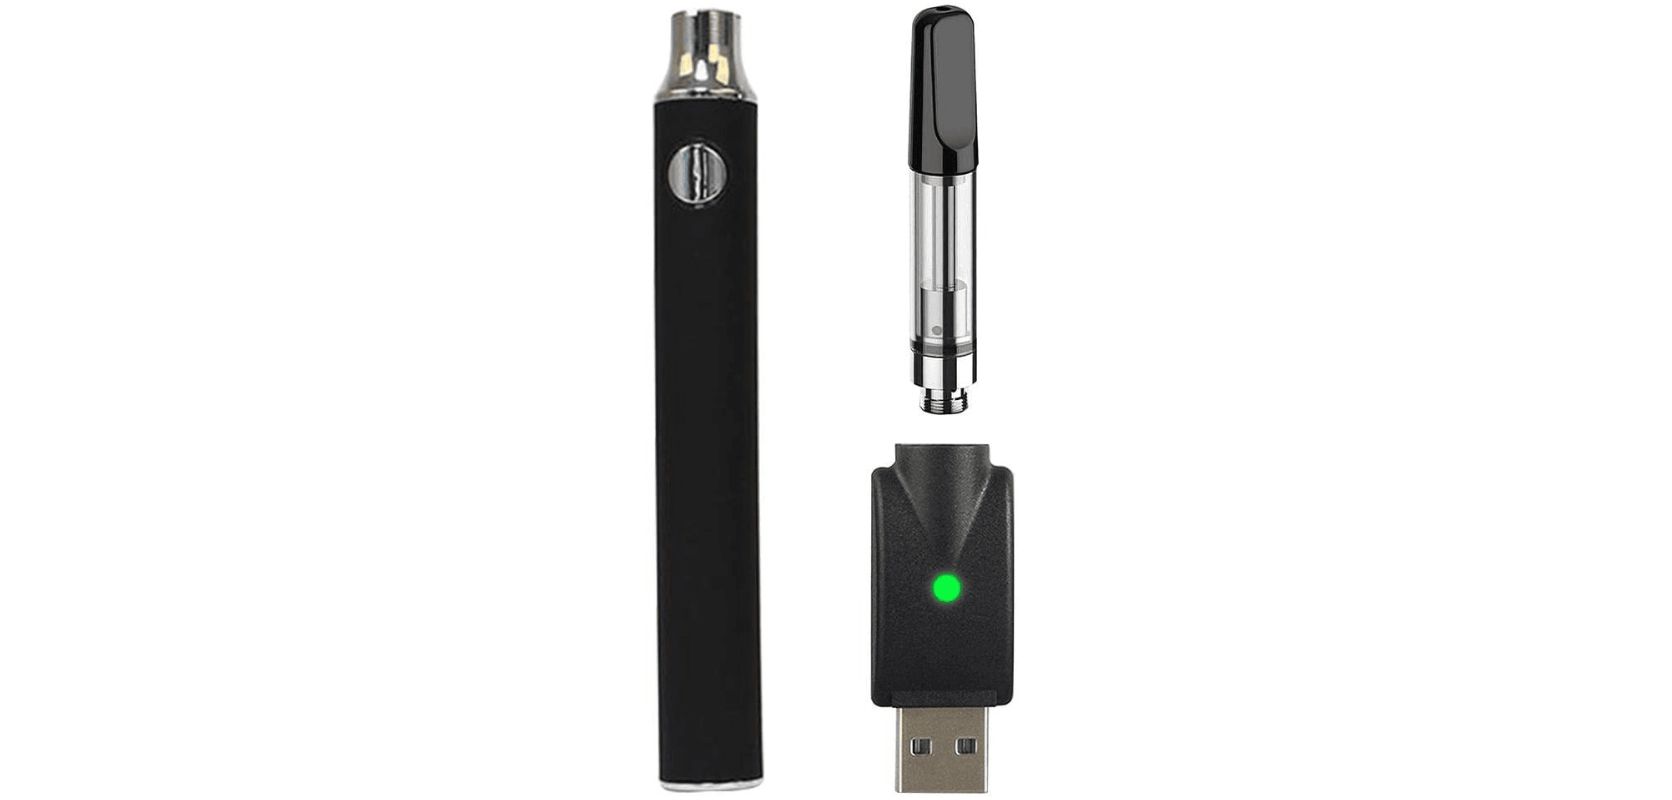 When you buy Canadian weed online, you will come across the term "510 thread dab pen battery". 